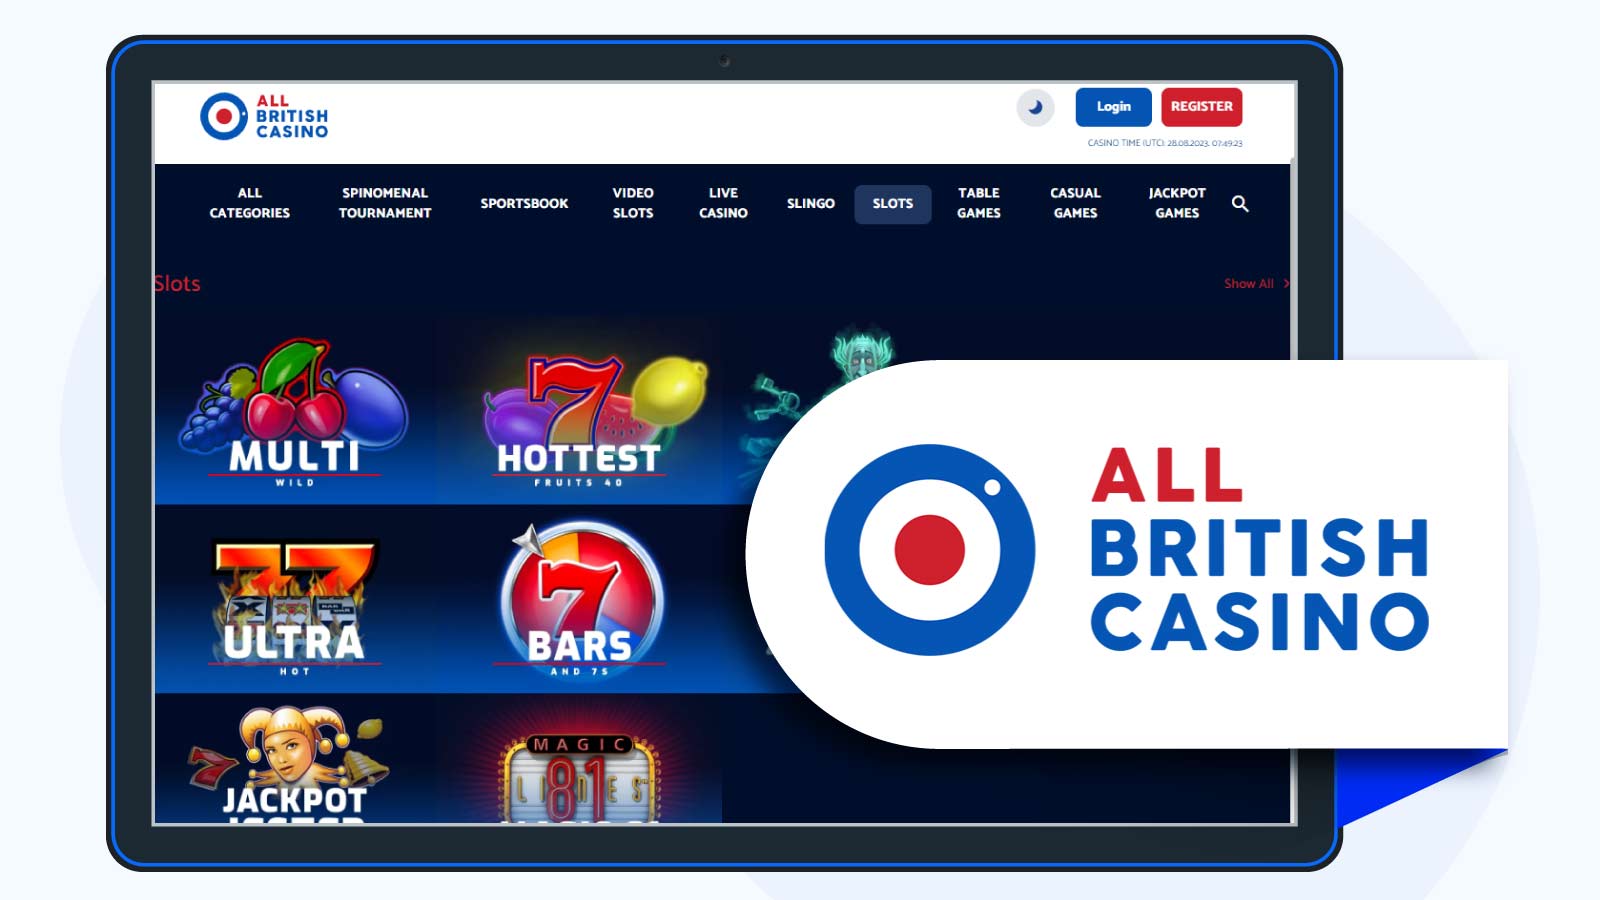 All British Casino Free Spins Book of Dead